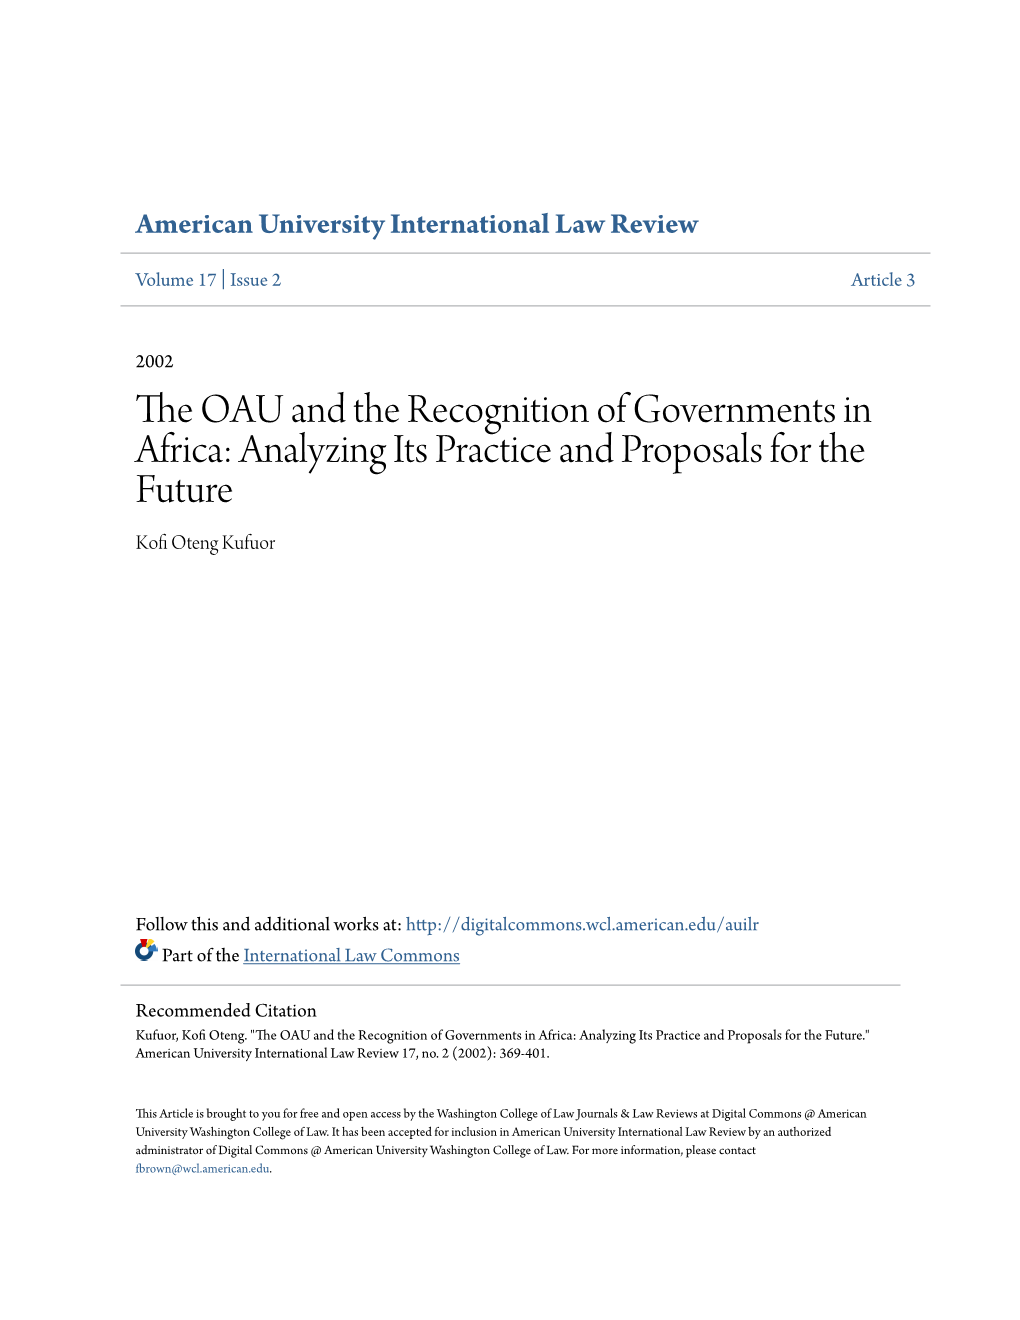 The Oau and the Recognition of Governments in Africa: Analyzing Its Practice and Proposals for the Future